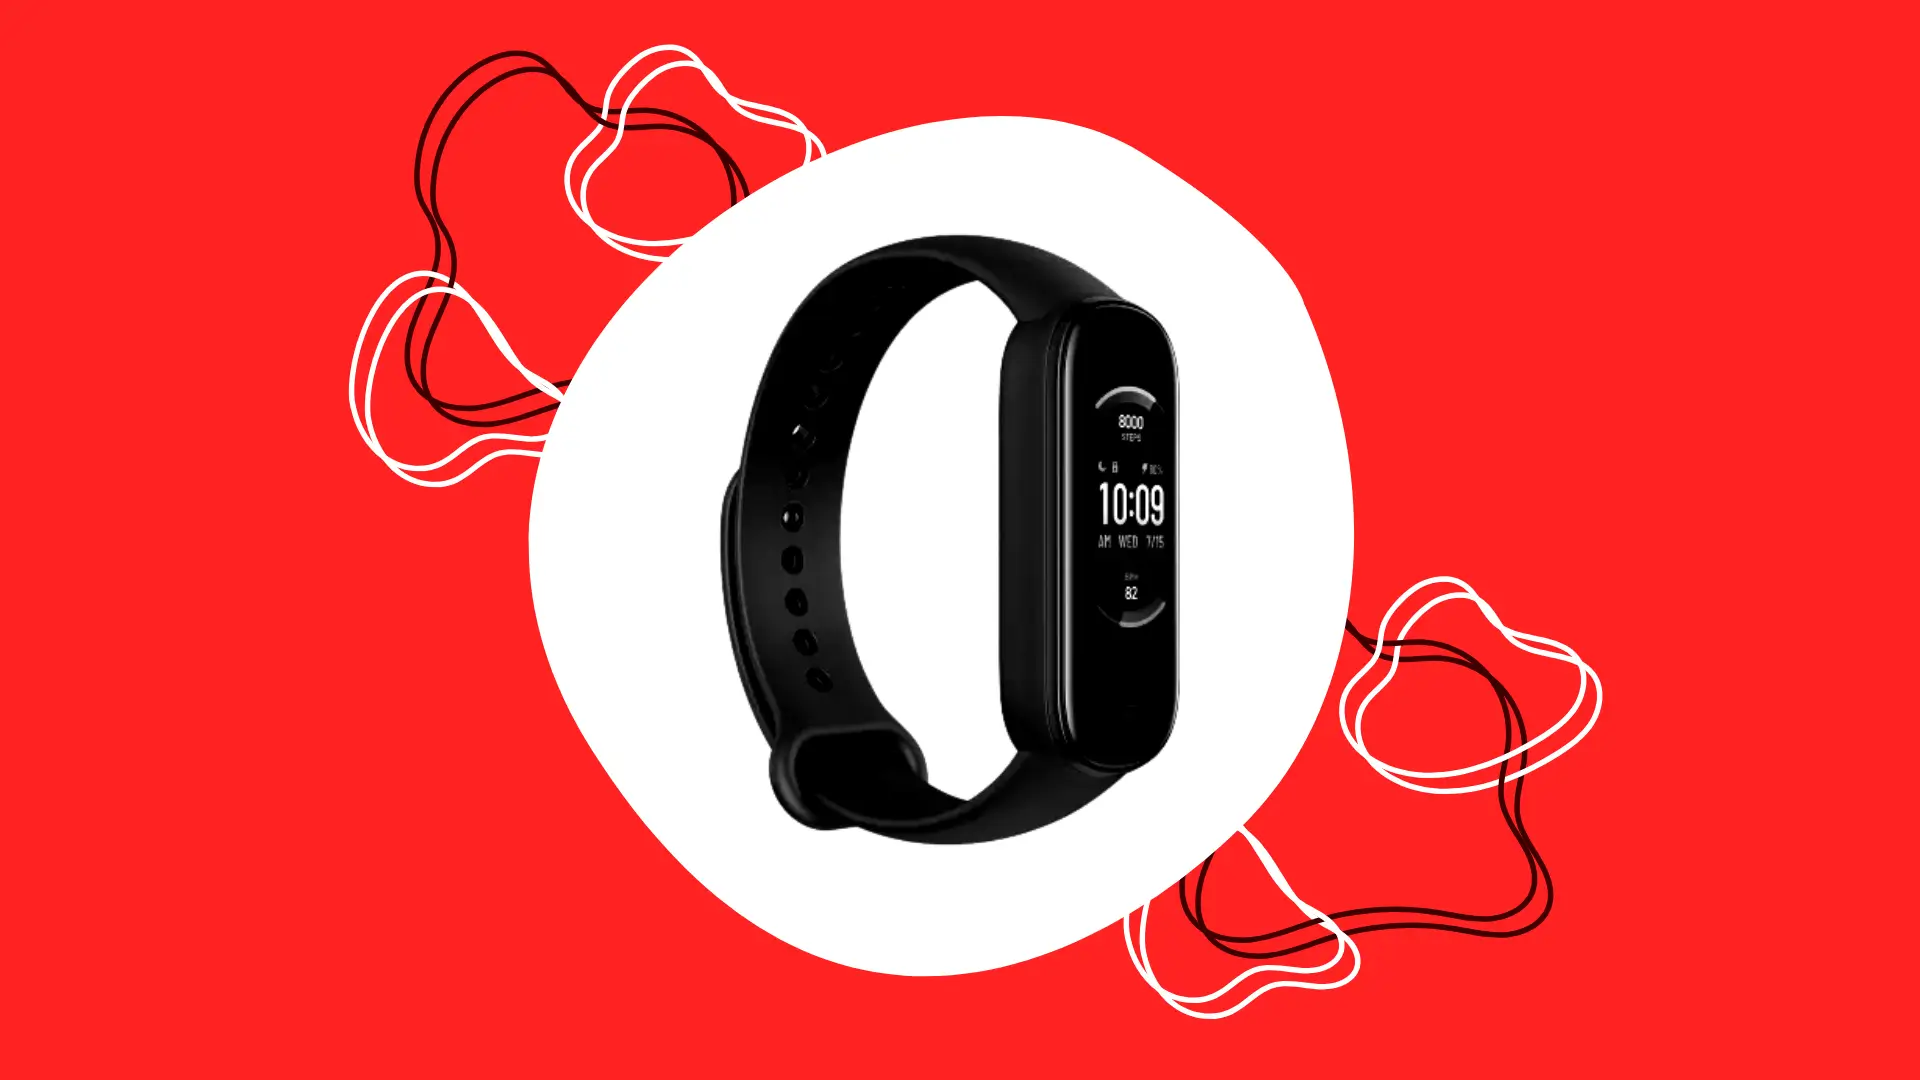 Amazfit Band 5 Specifications